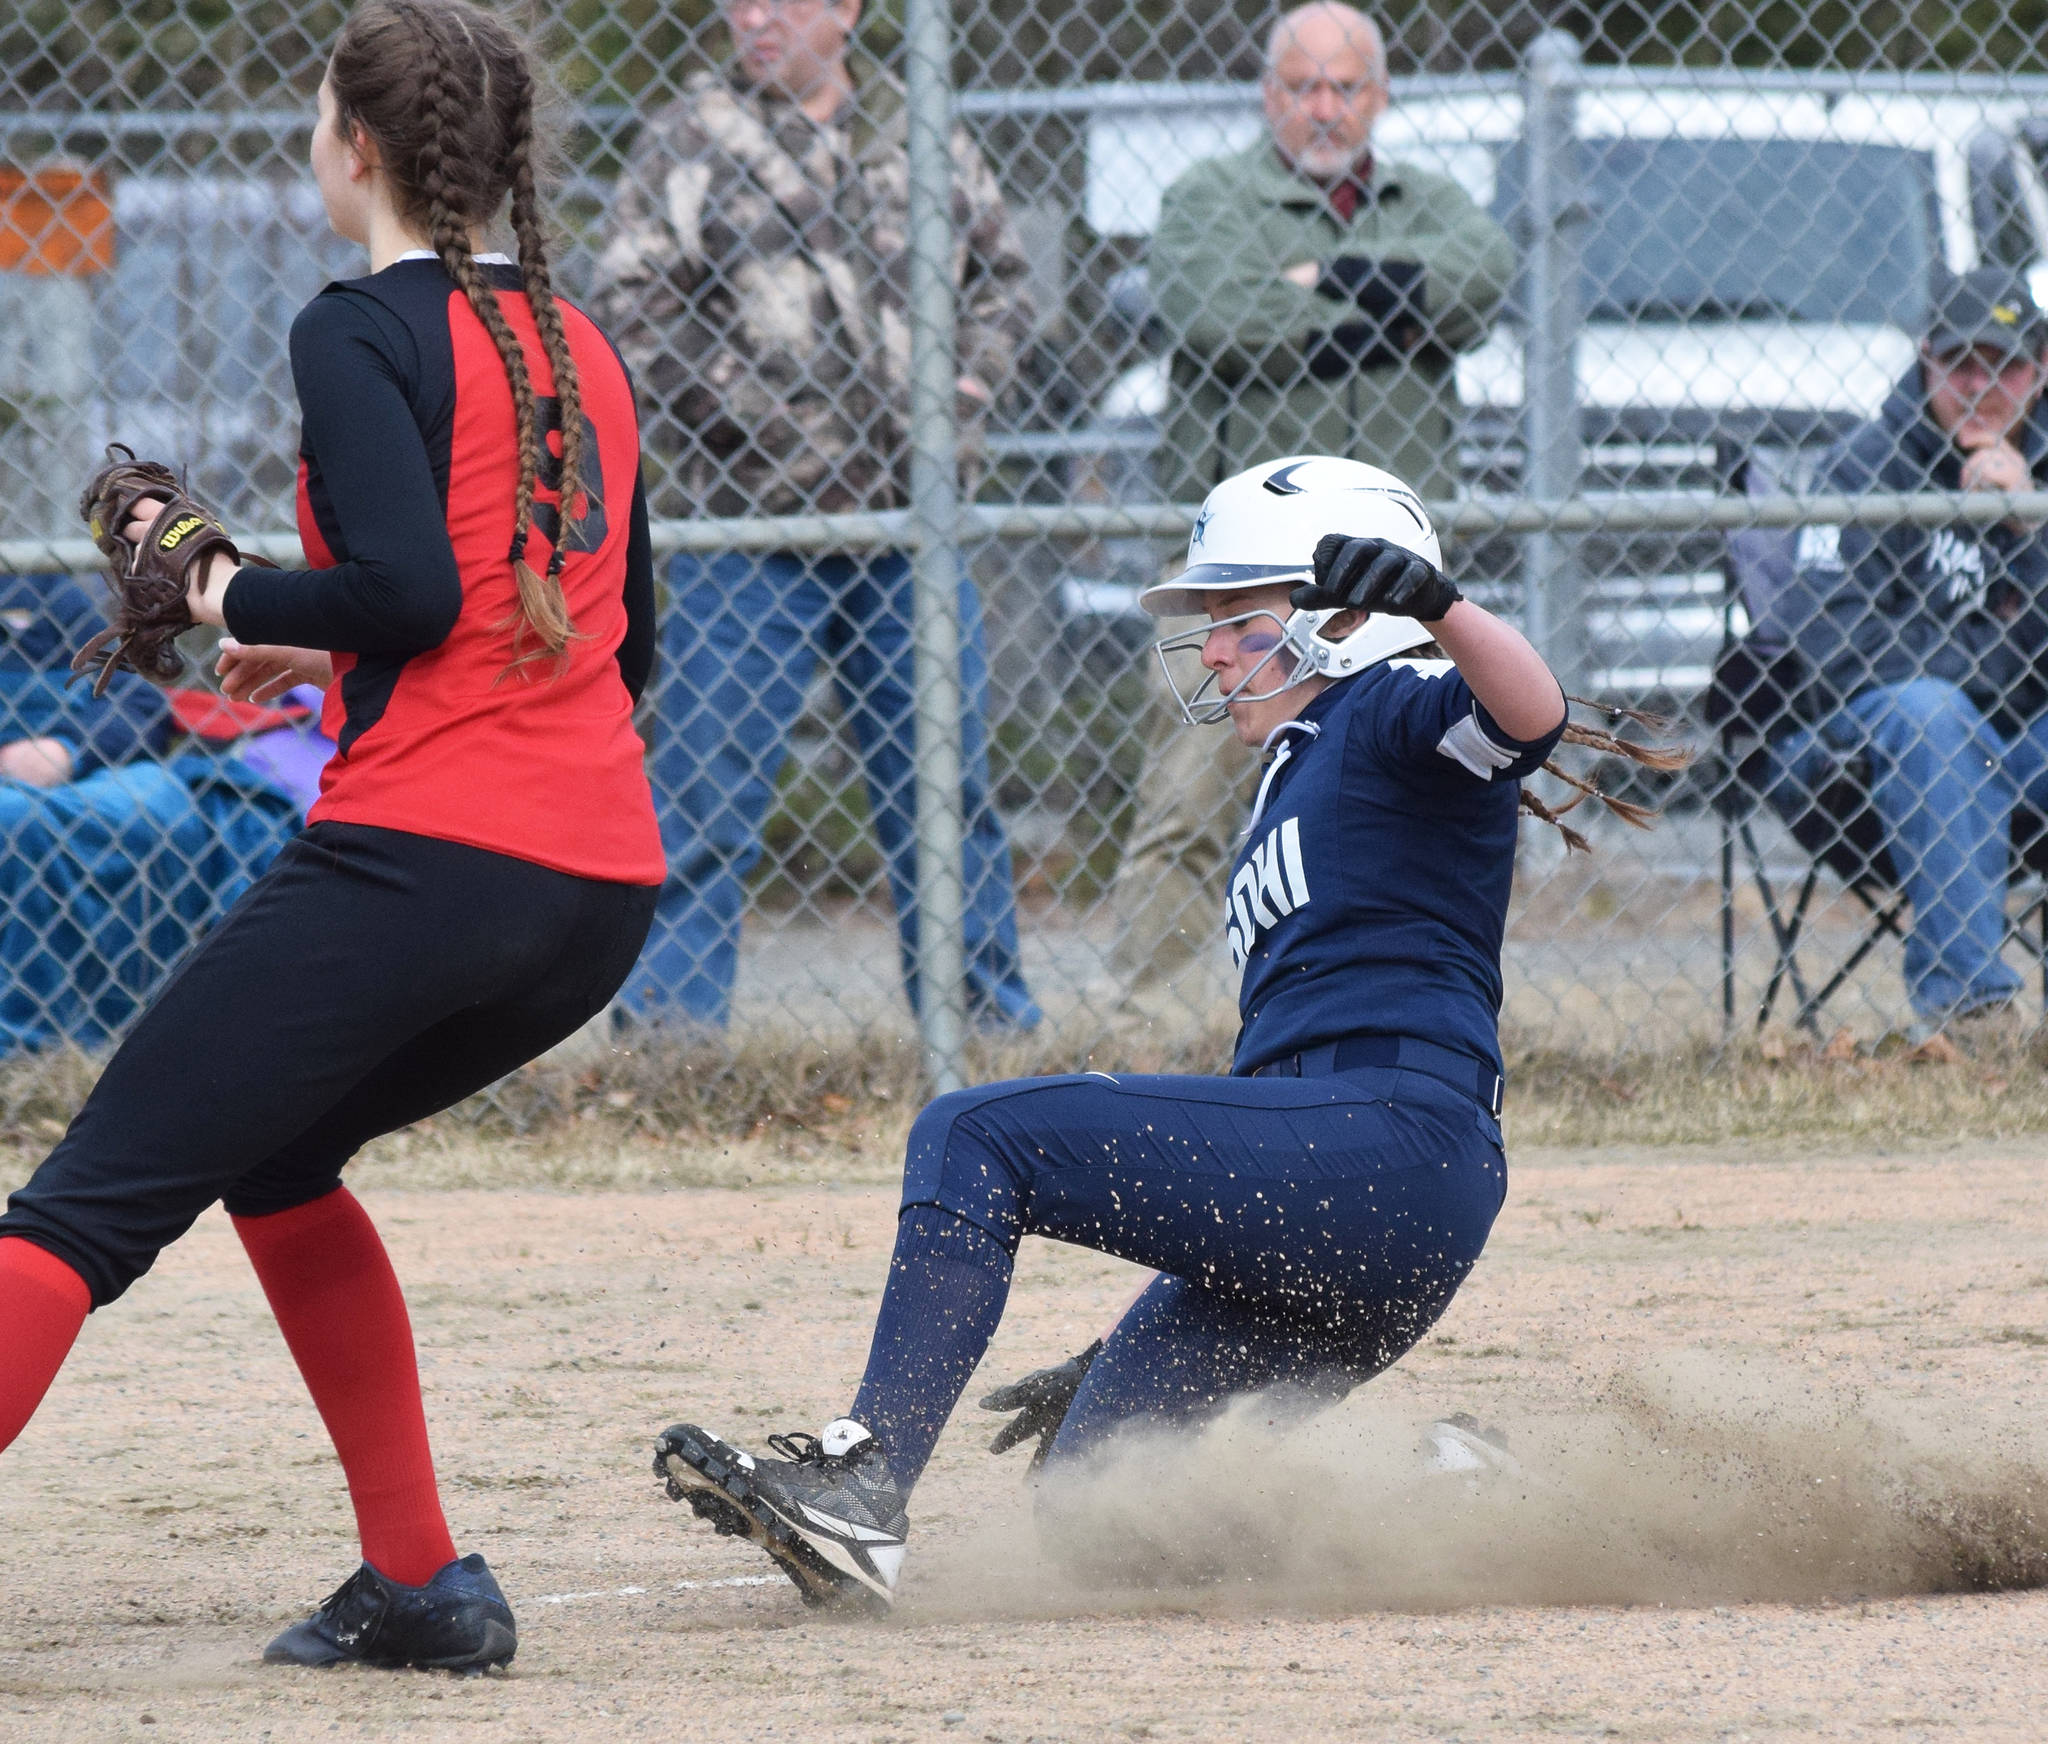 Soldotna’s Bailey Berger slides home safe in front of Kenai Central’s Lexi Reis, Thursday, April 25, 2019, at the Soldotna Softball Fields. (Photo by Joey Klecka/Peninsula Clarion)